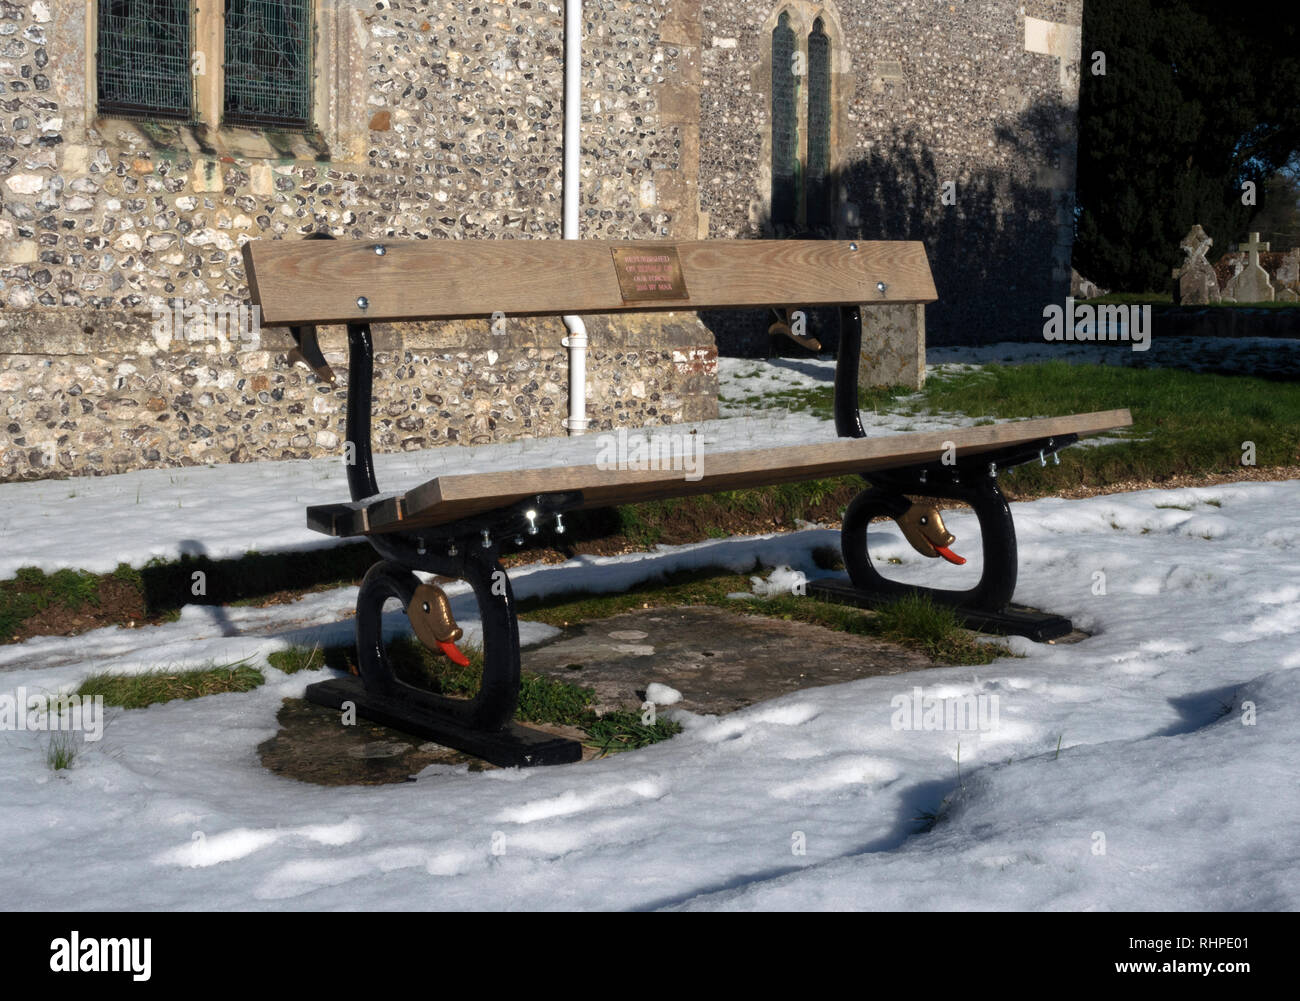 Great War Memorial Bench, St Peter's Church, Goodworth Clatford, nr Andover, Hampshire, England, United Kingdom Stock Photo